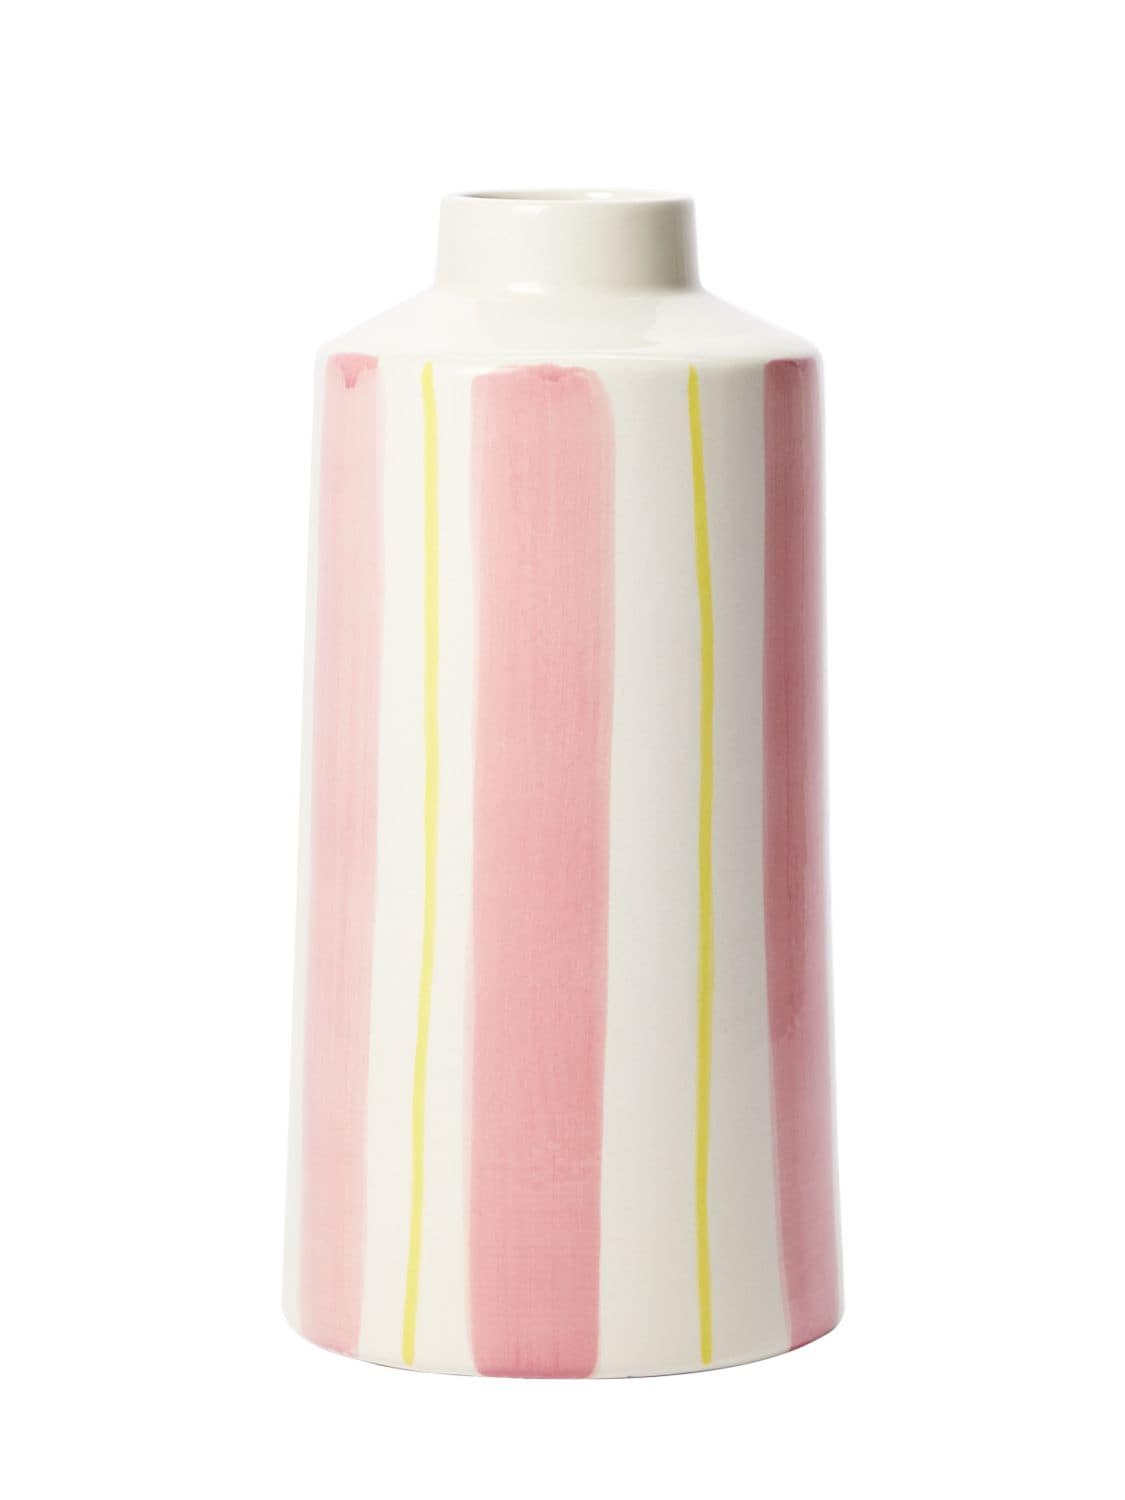 Image of Small Pink Stripes Vase